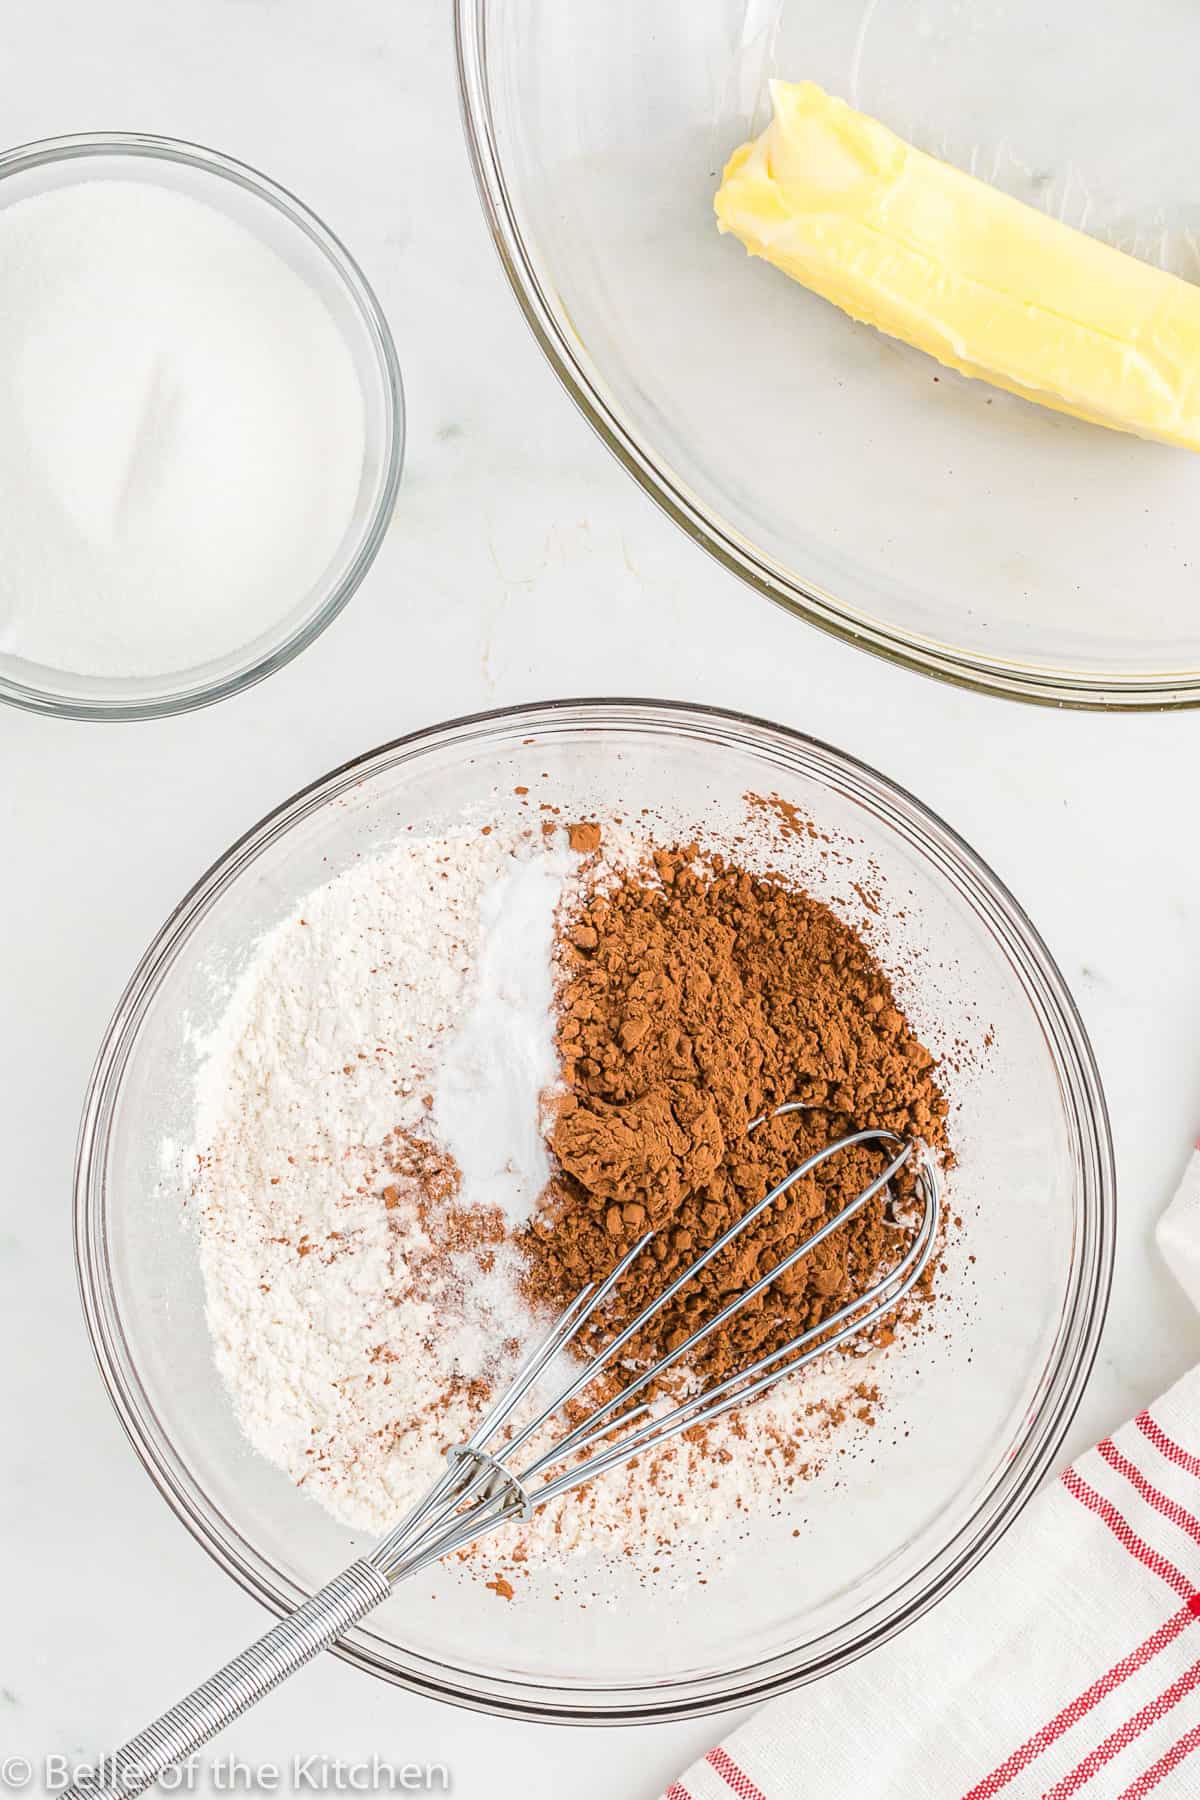 flour and cocoa powder in a glass bowl